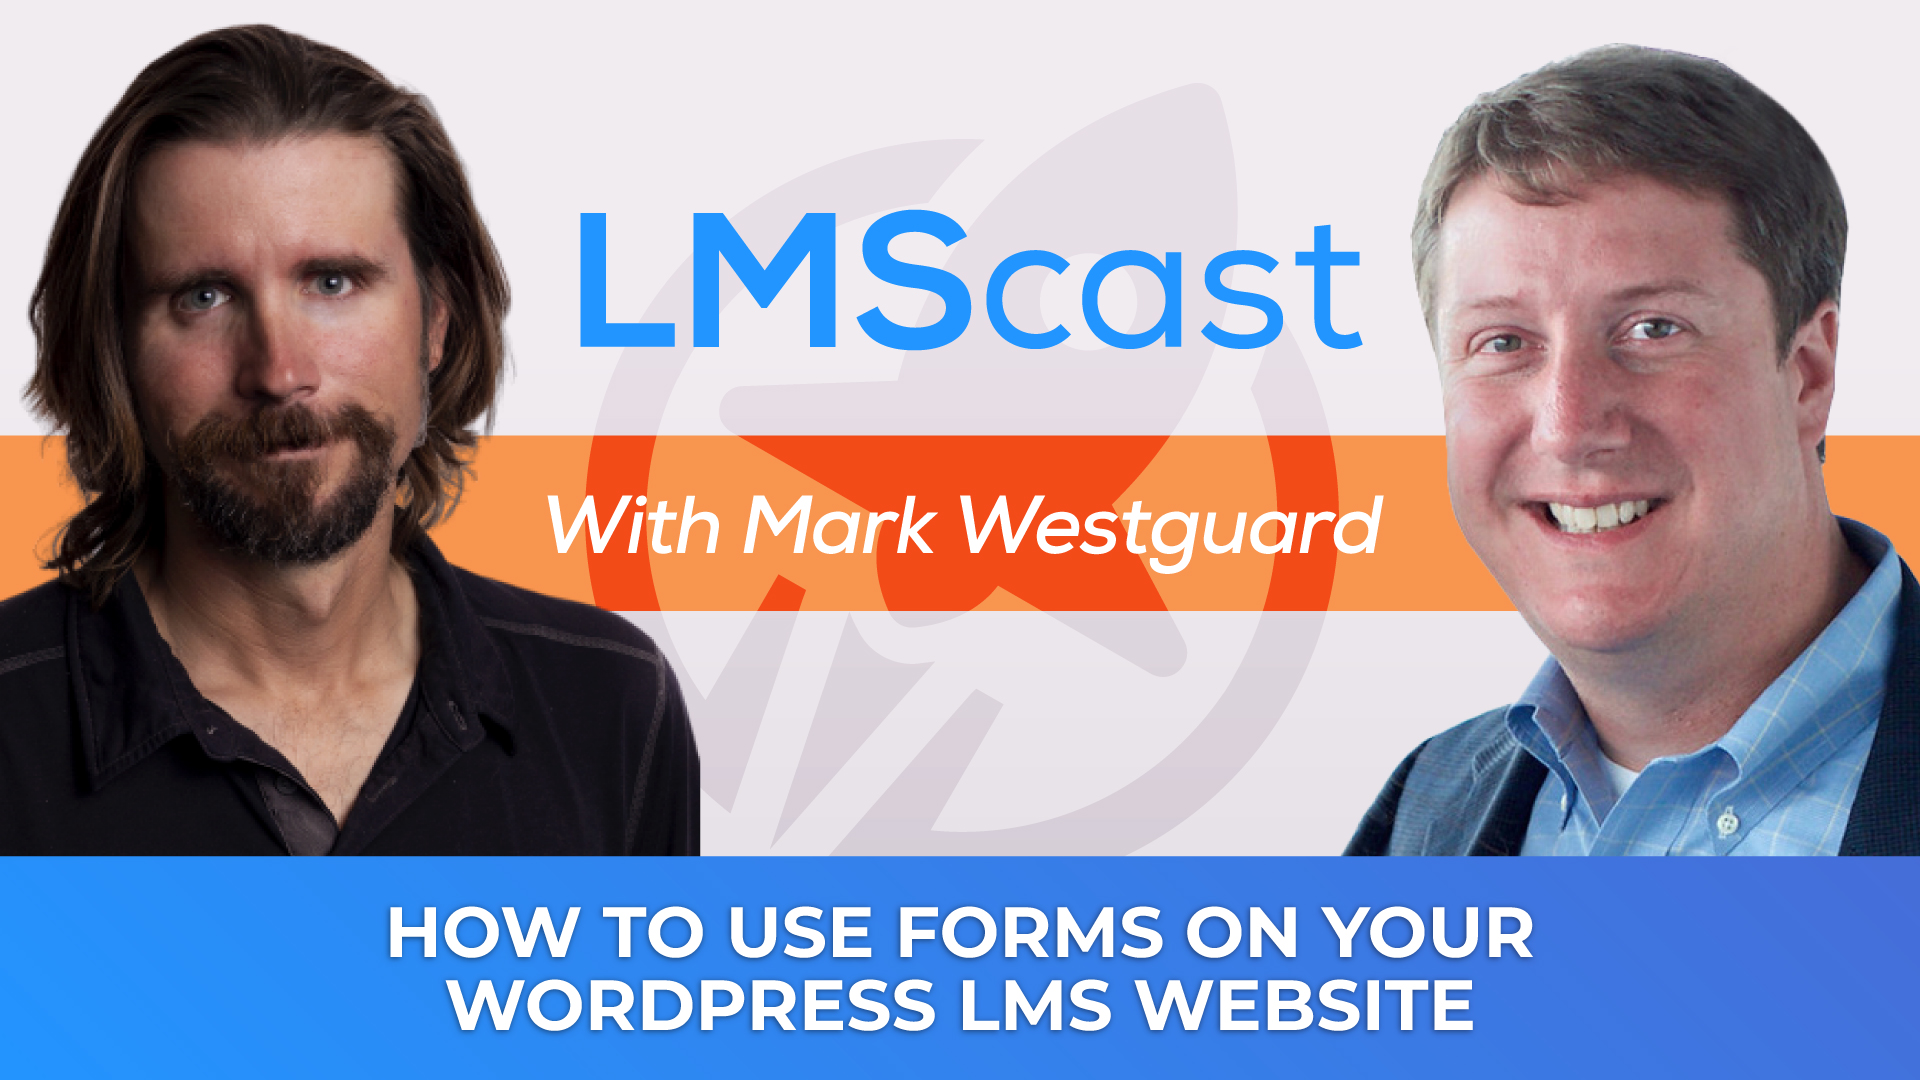 How to Use Forms on Your WordPress LMS Website with Mark Westguard from WS Form